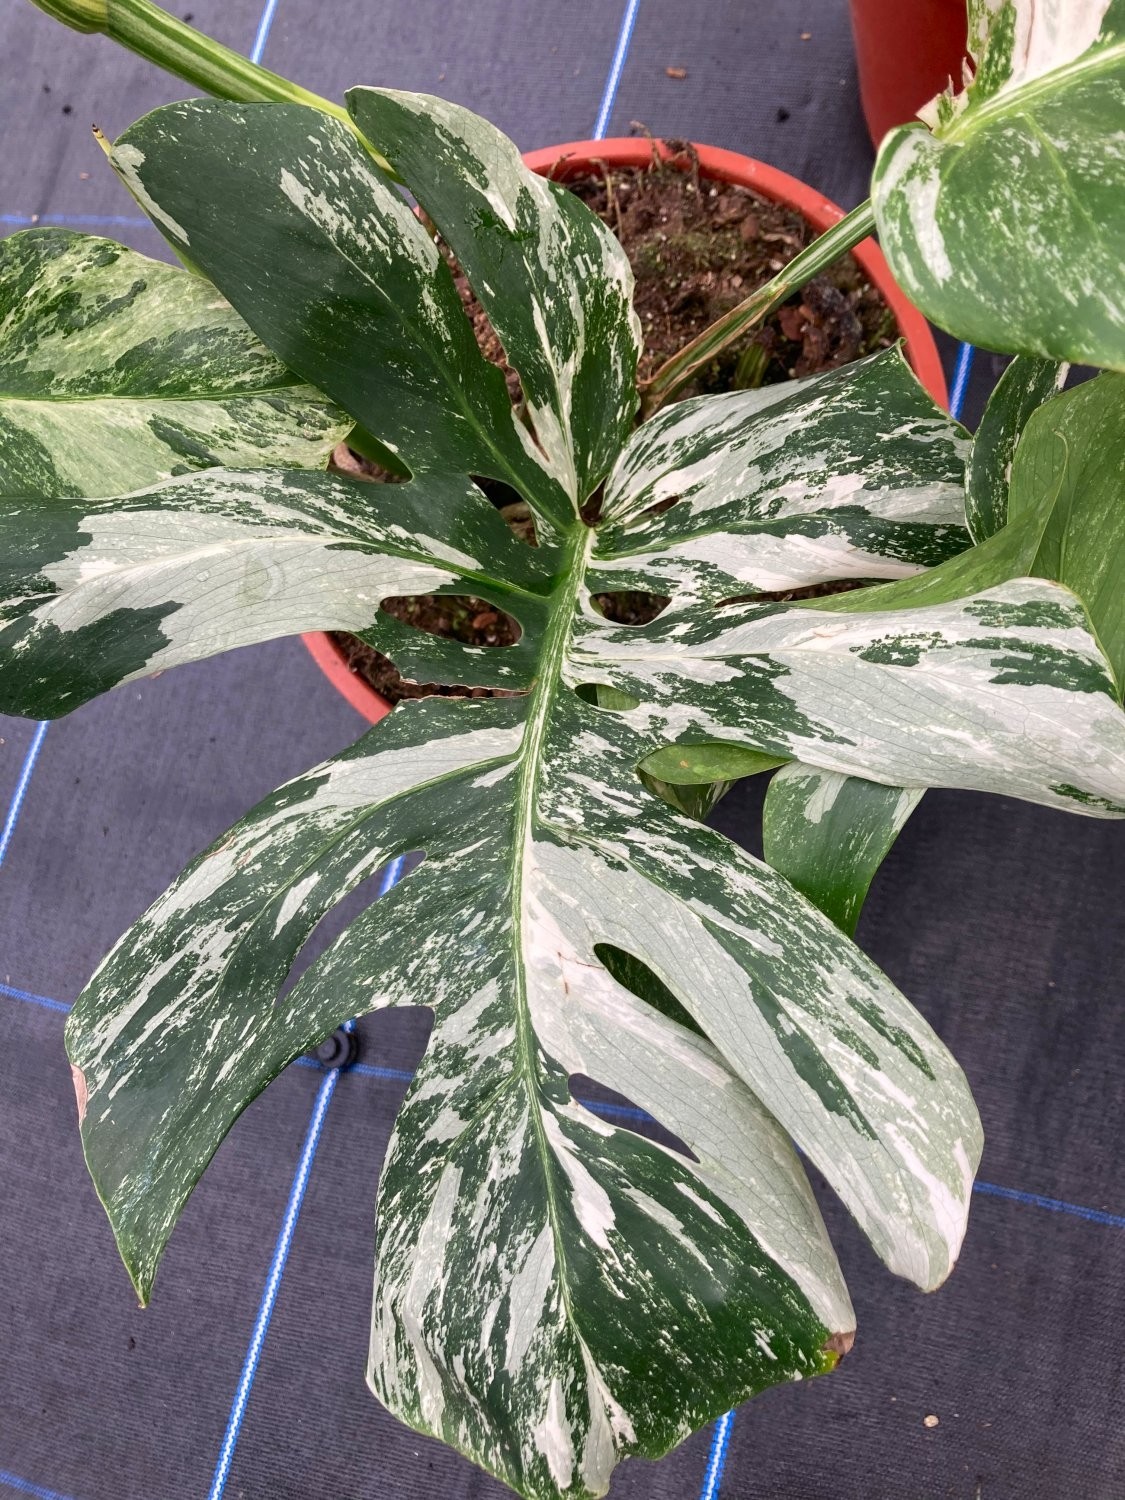 LARGE - Monstera deliciosa variegata - Variegated Swiss Cheese Plant